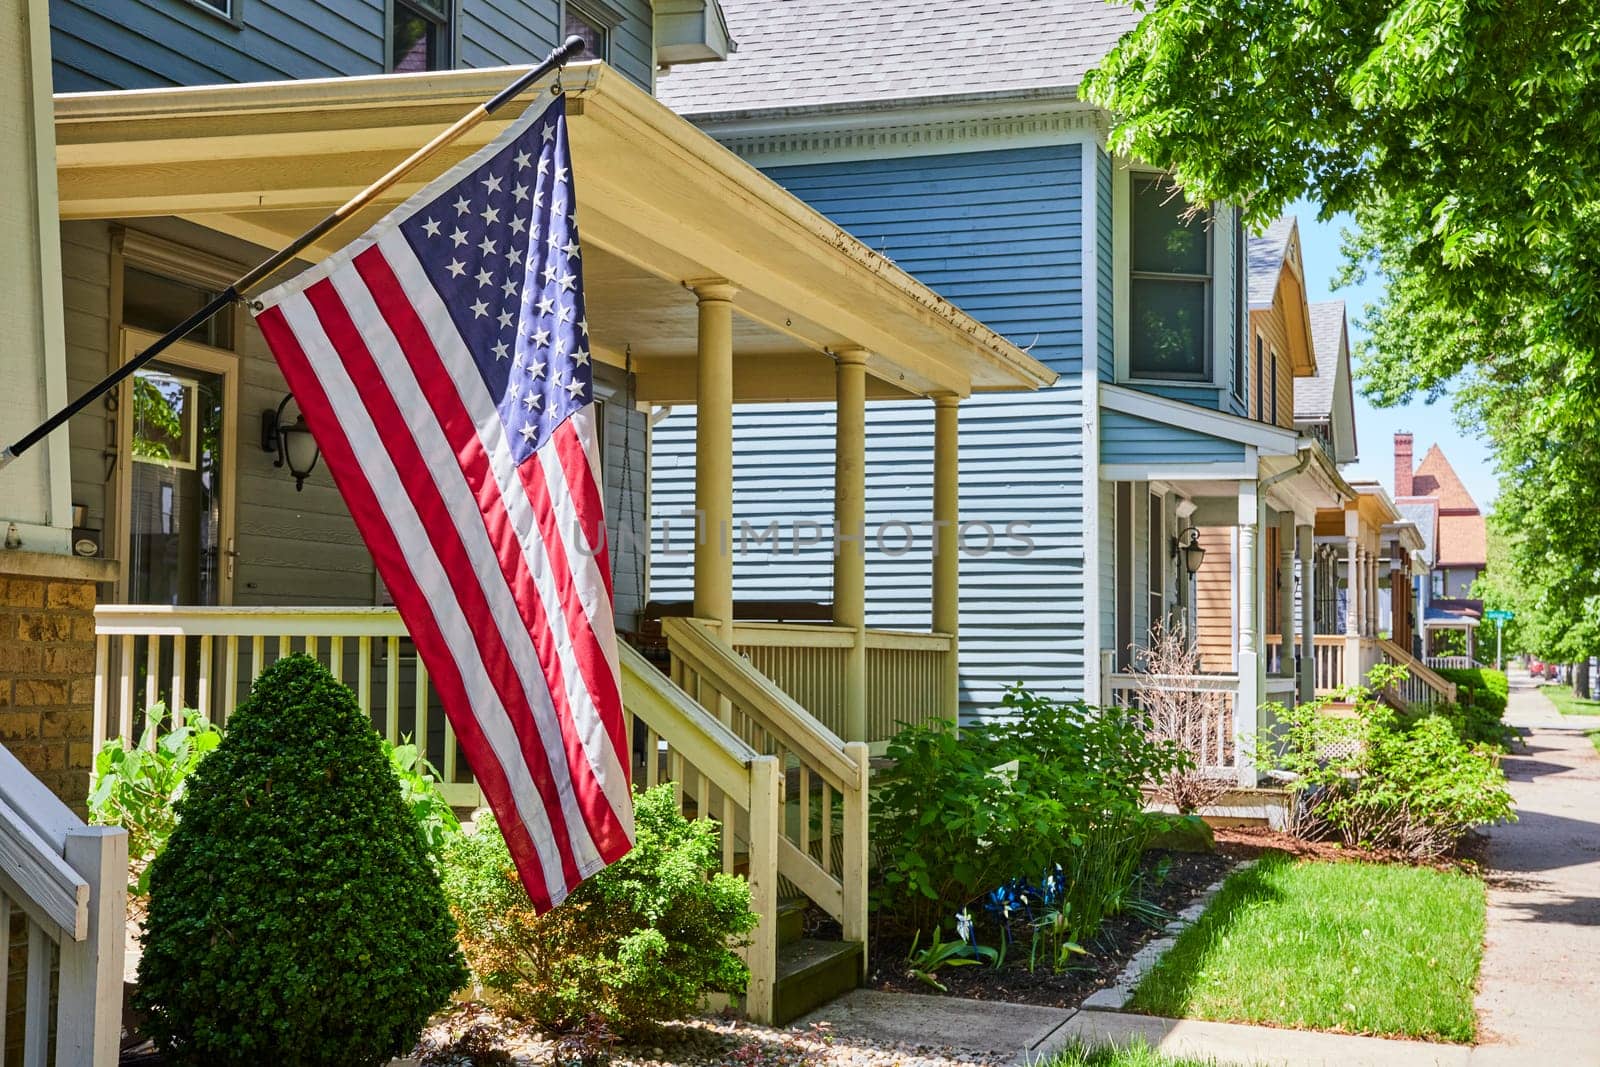 Sunny suburban street in Fort Wayne, USA, with homes displaying American flags, embodying community and patriotism.